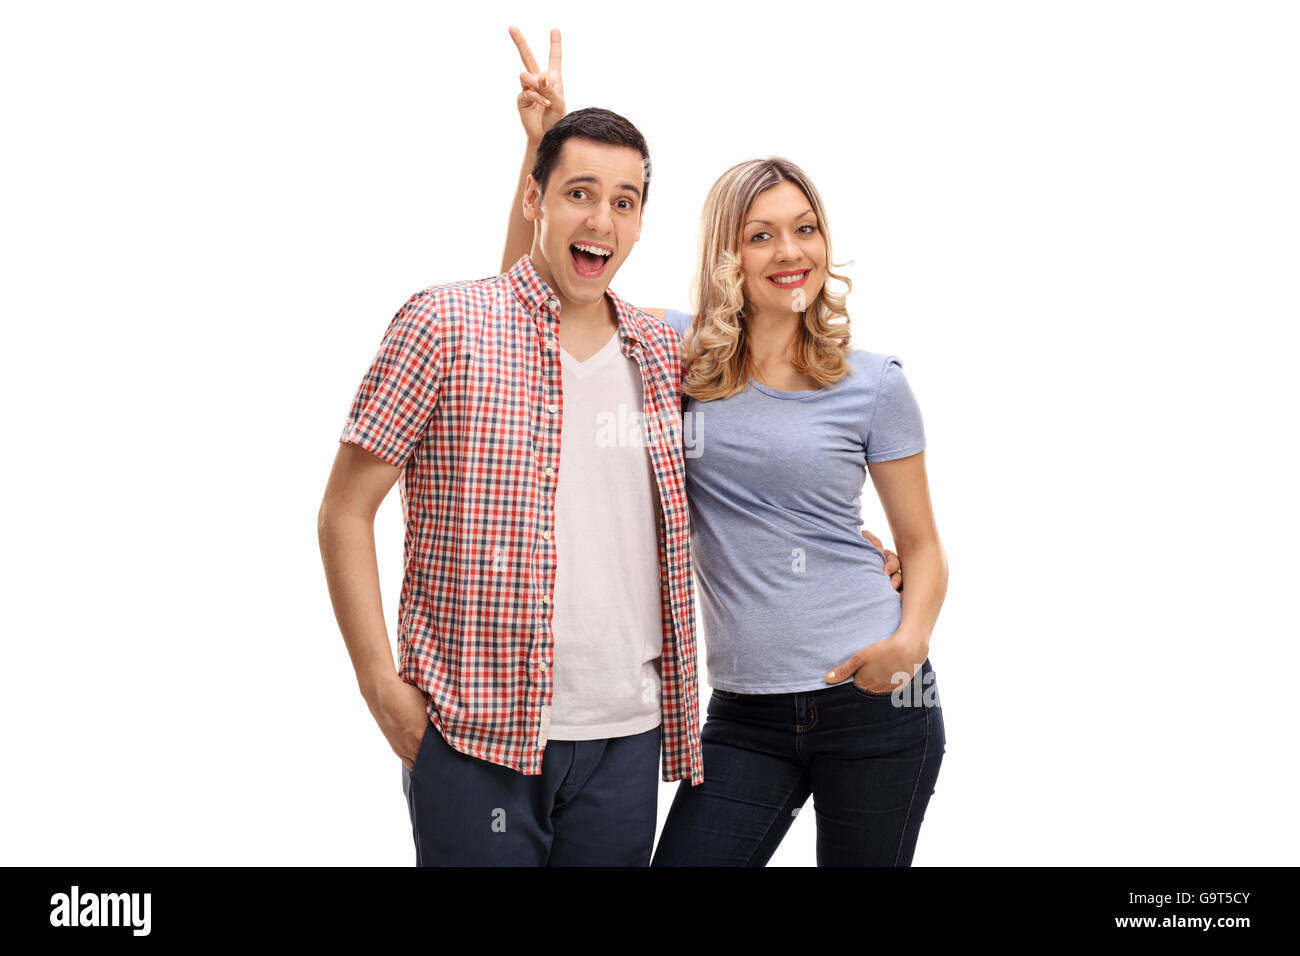 Woman pranking her male friend with bunny ears isolated on white background Stock Photo